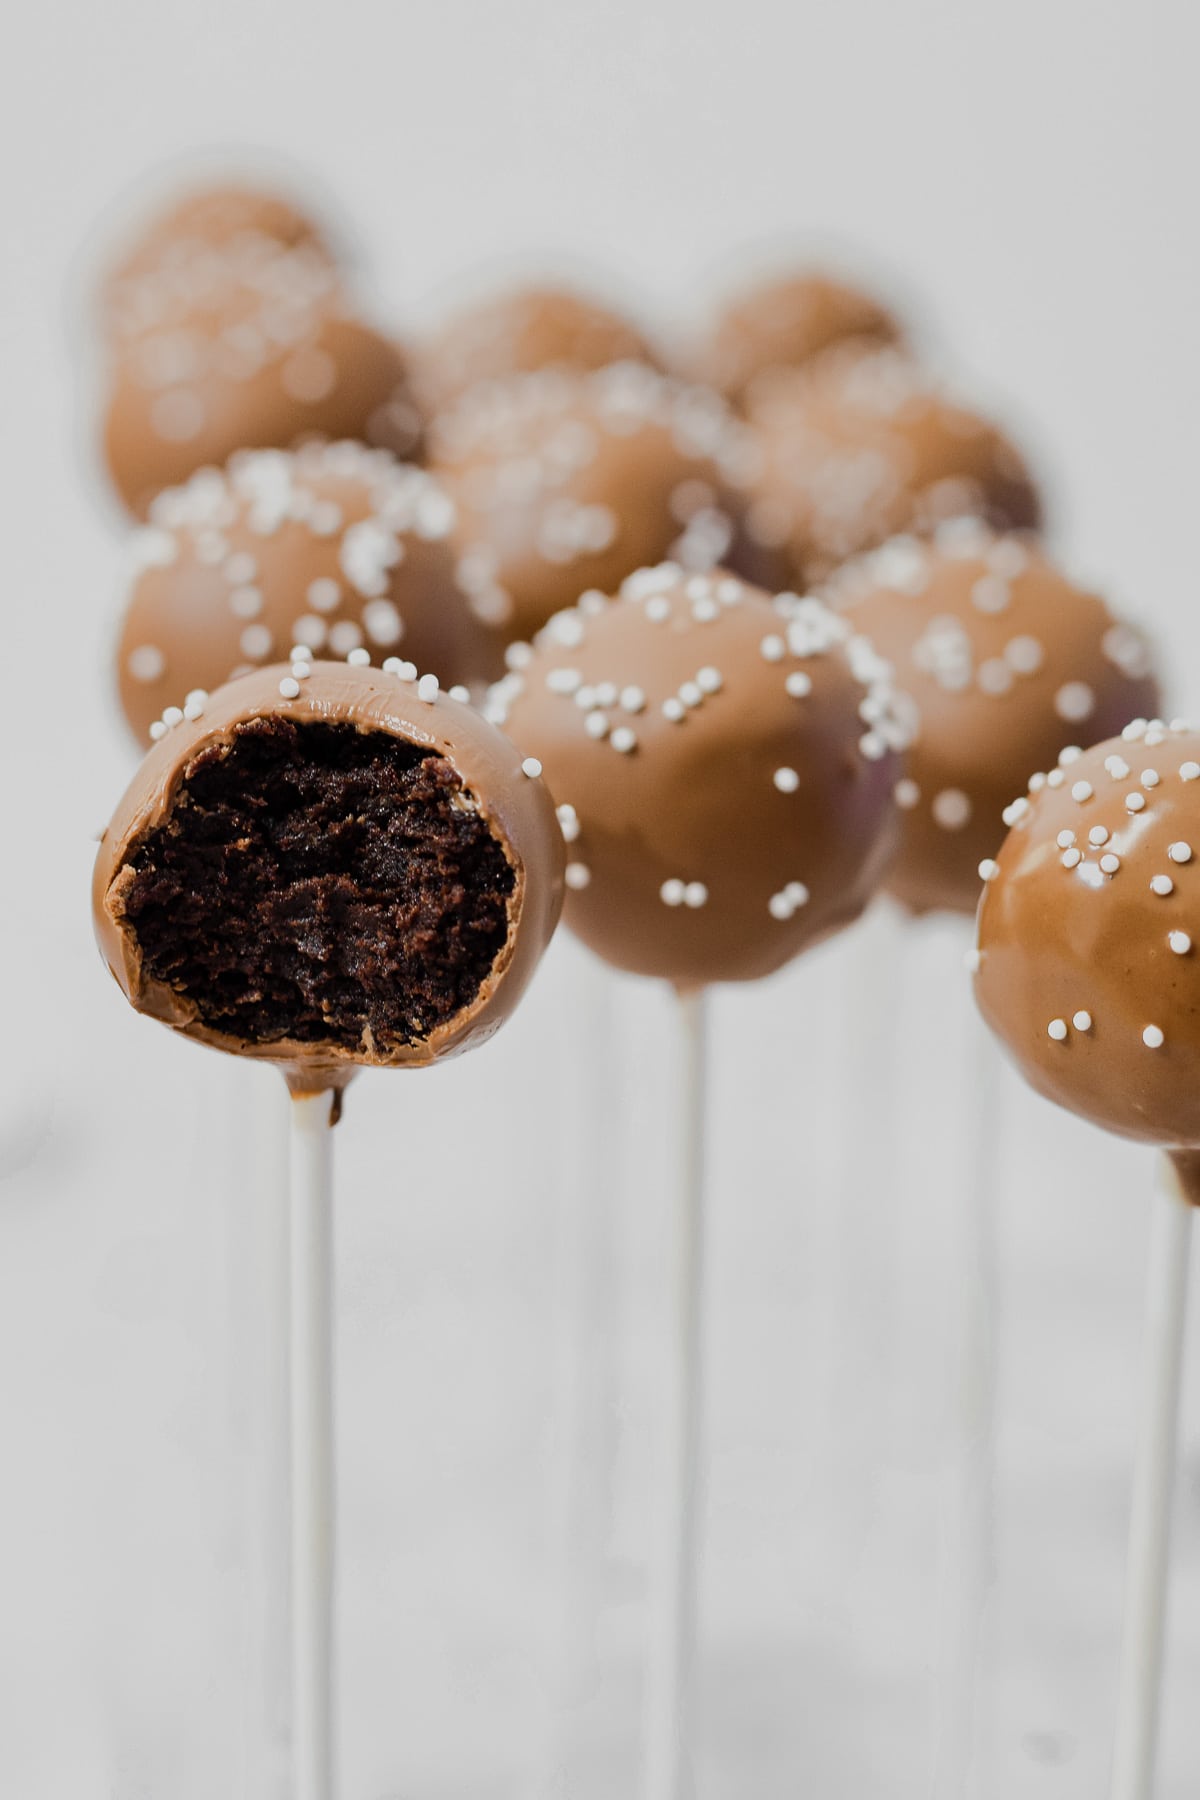 starbucks copycat chocolate coated chocolate cake pops with one bitten in half to show chocolate cake ball middle